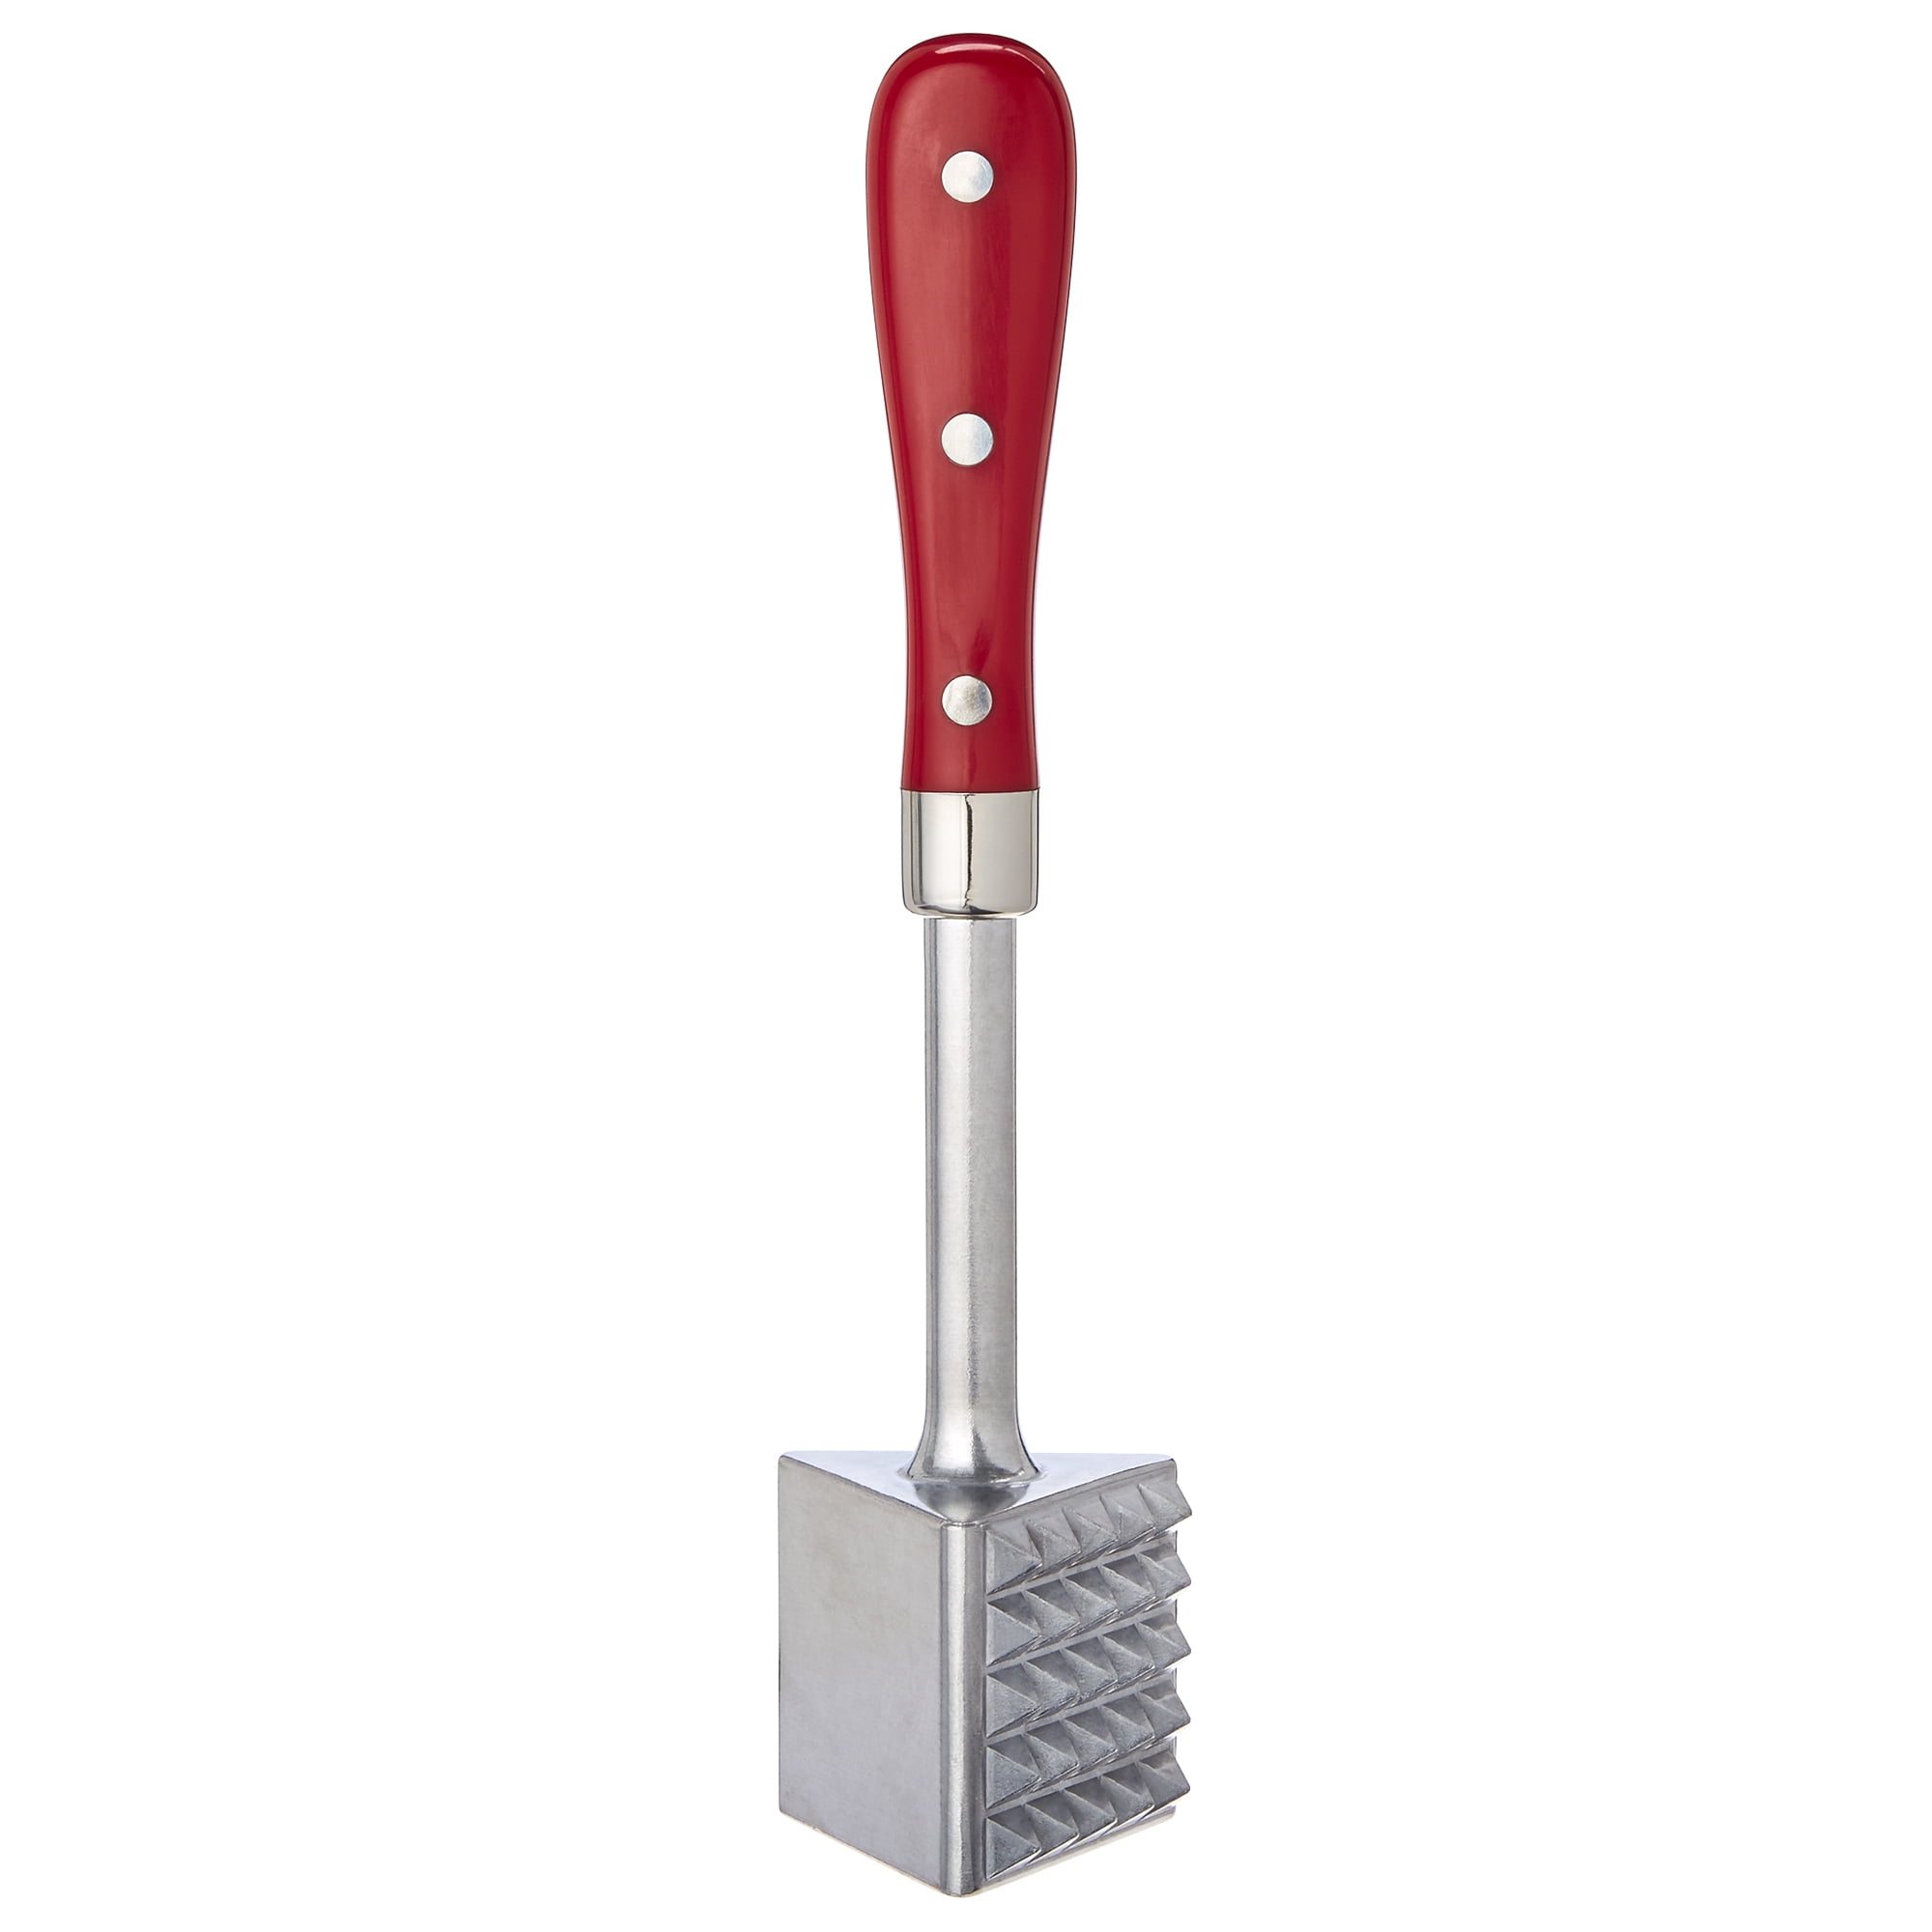 ✨New The Pioneer Woman Meat Tenderizer Red 3 Sided Coarse Fine Flat Spring 2019✨ 